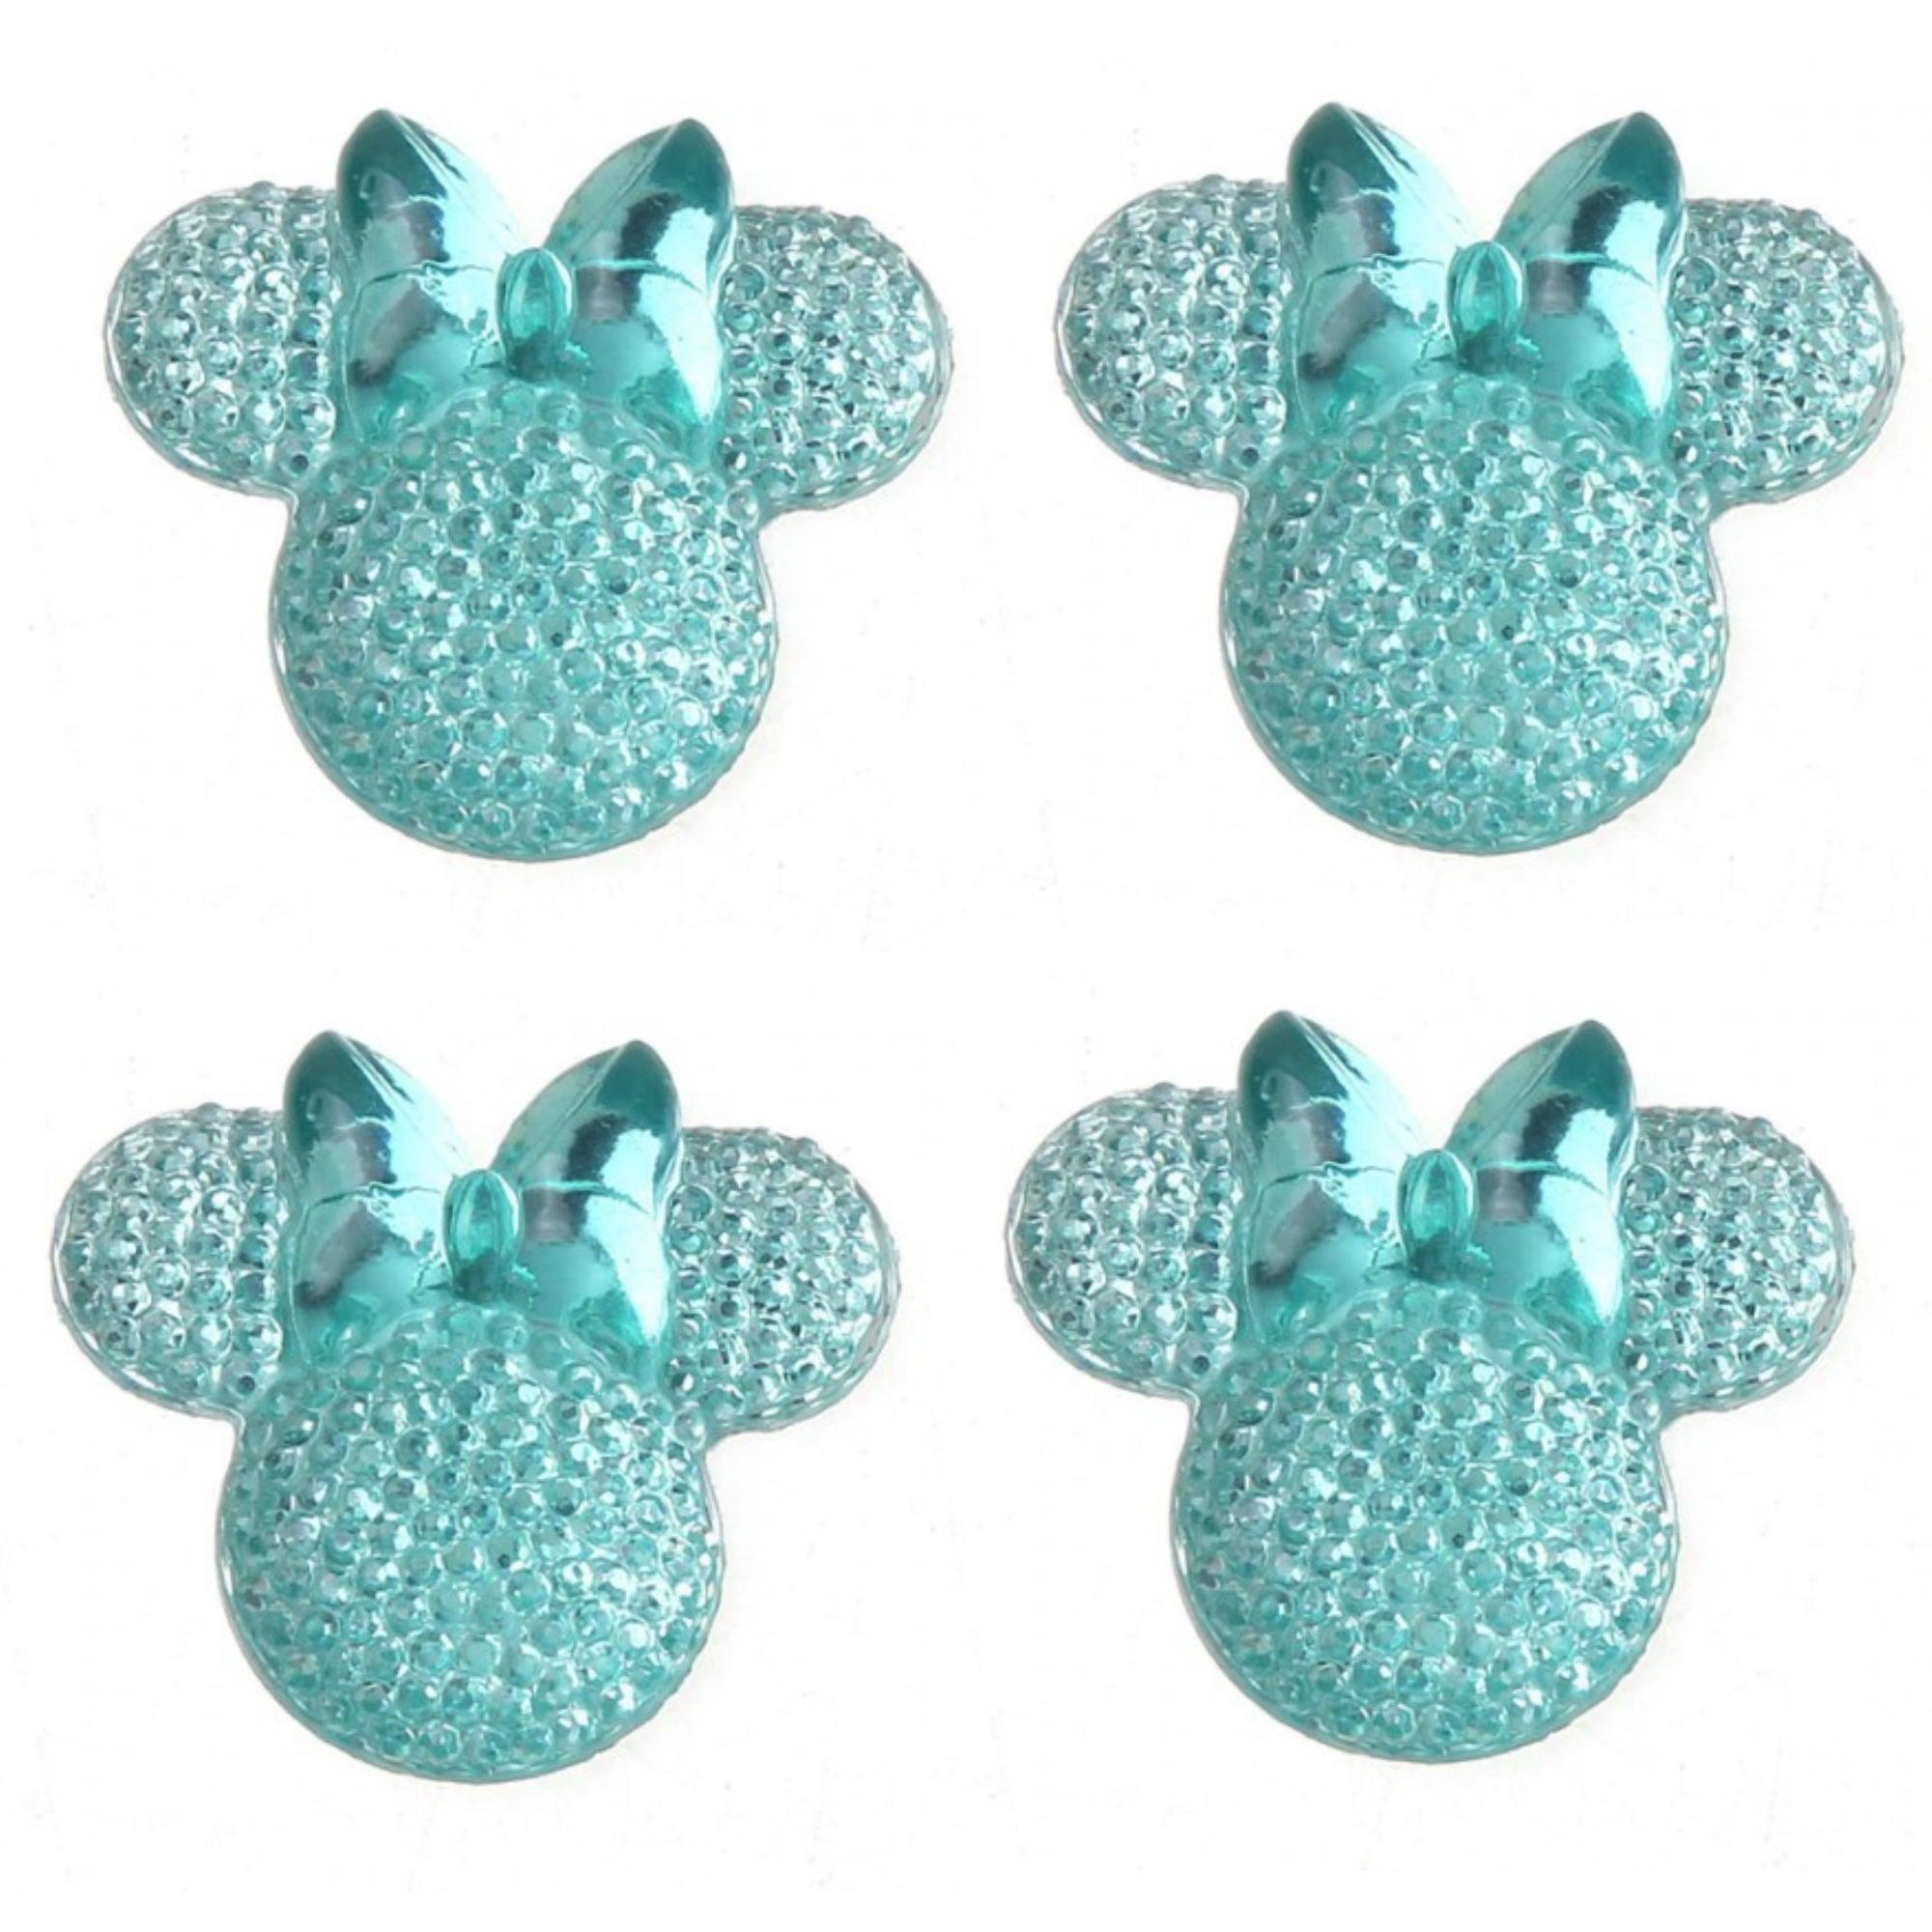 Disneyana Collection 1" Bling Aqua Mouse Ears & Bow Scrapbook Embellishments by SSC Designs - 4 Pieces